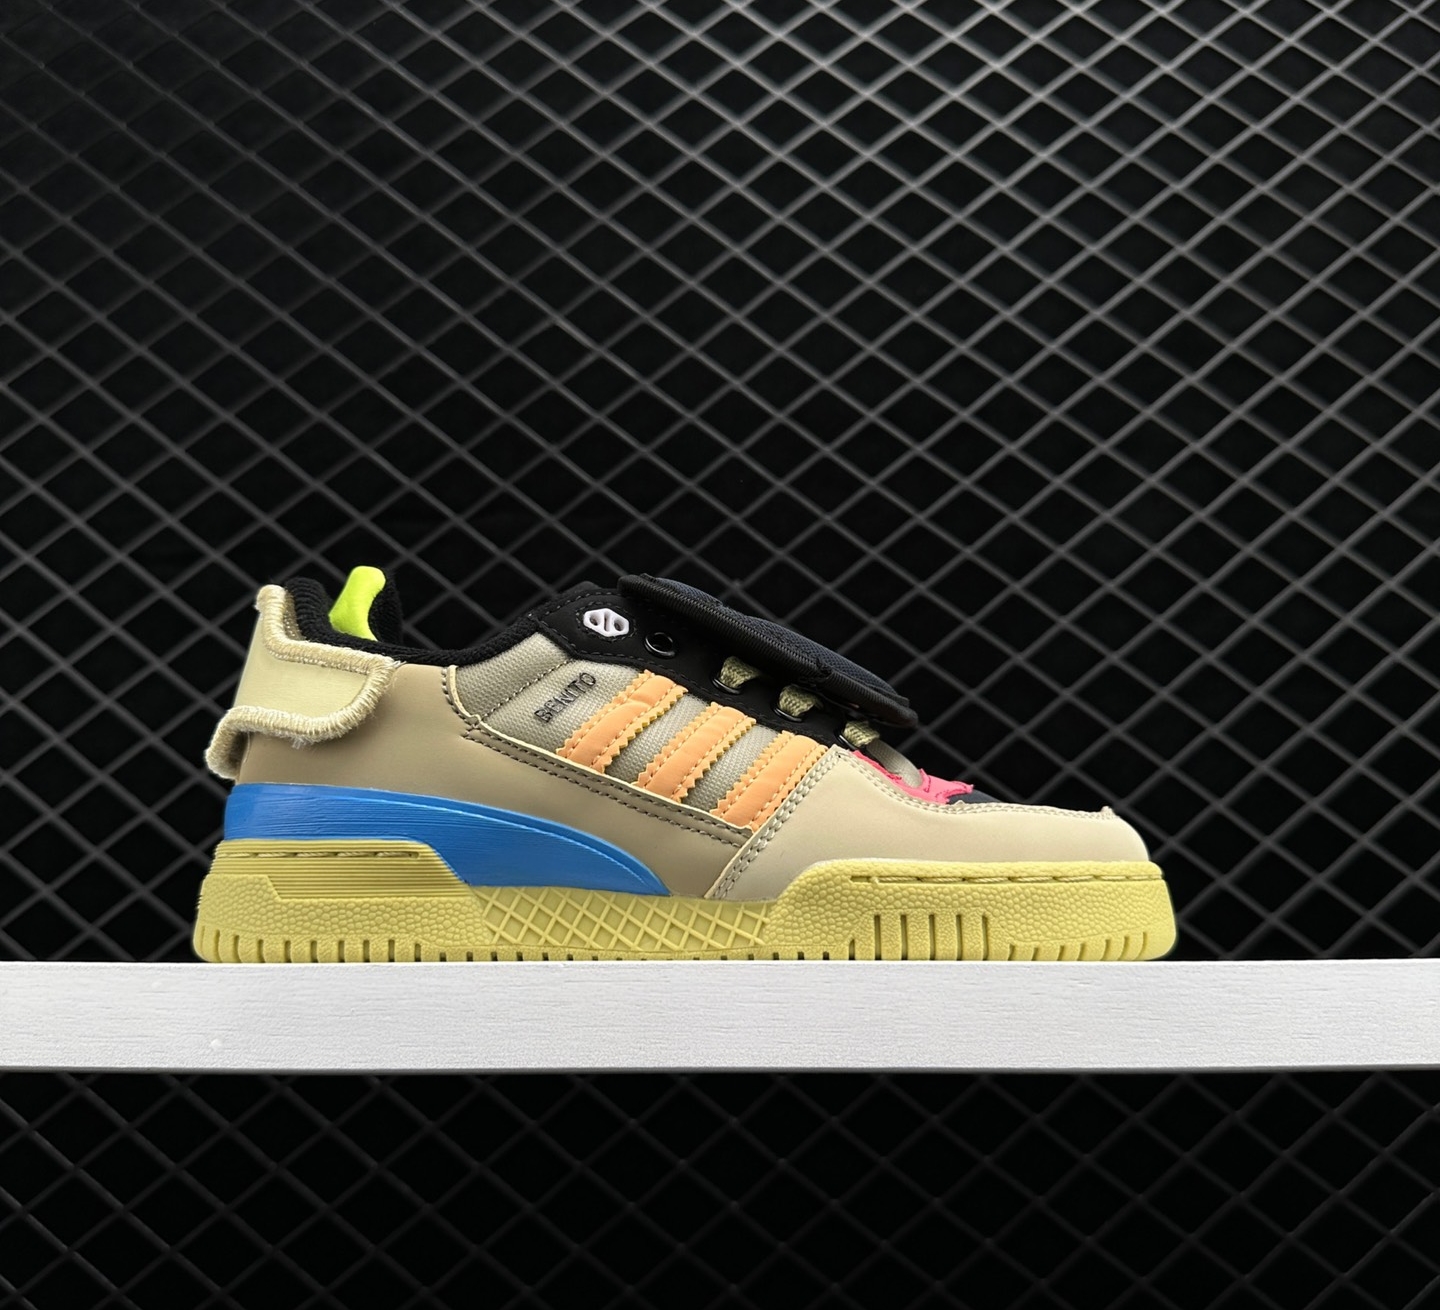 Adidas Bad Bunny x Forum Powerphase 'Catch and Throw' GZ2009 - Exclusive Collaboration Sneakers